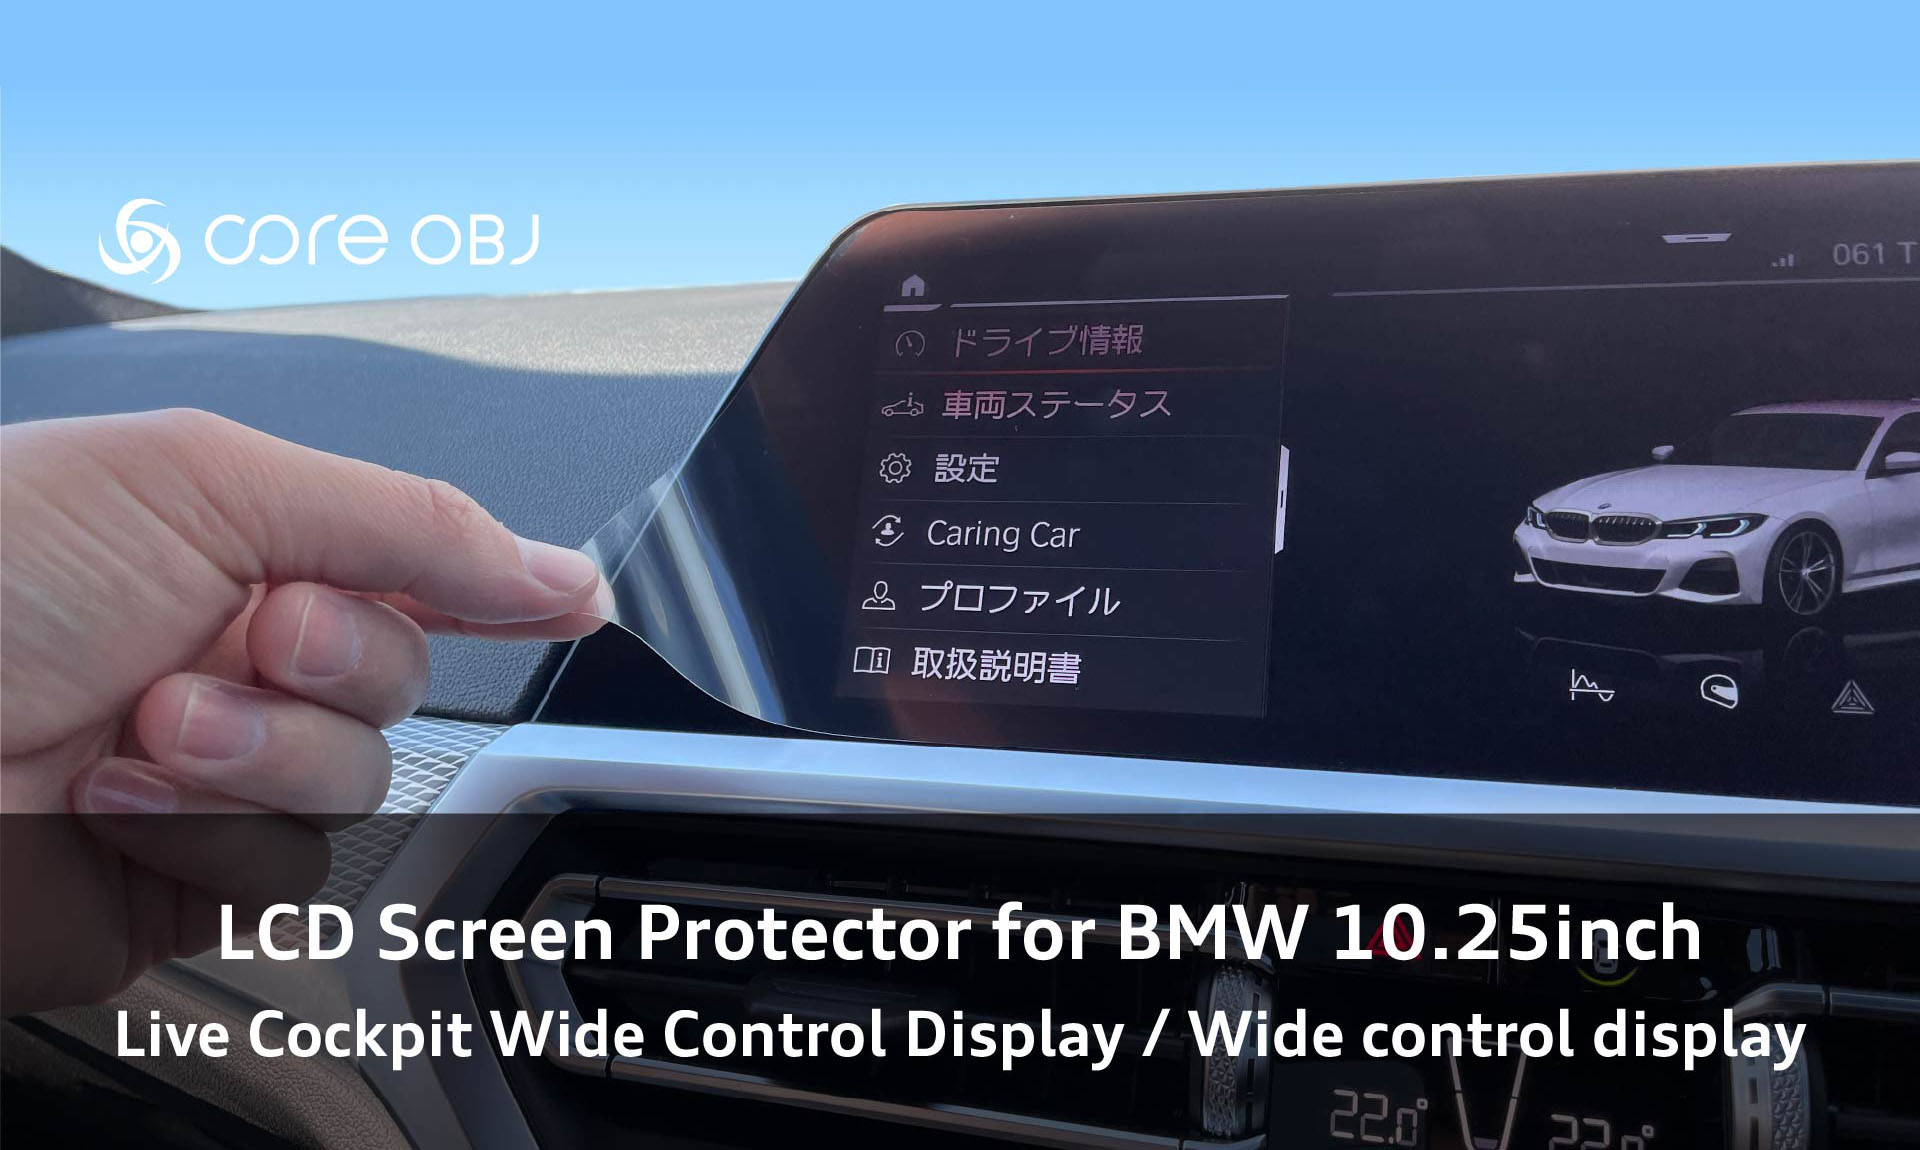 LCD Screen Protector for BMW 10.25inch